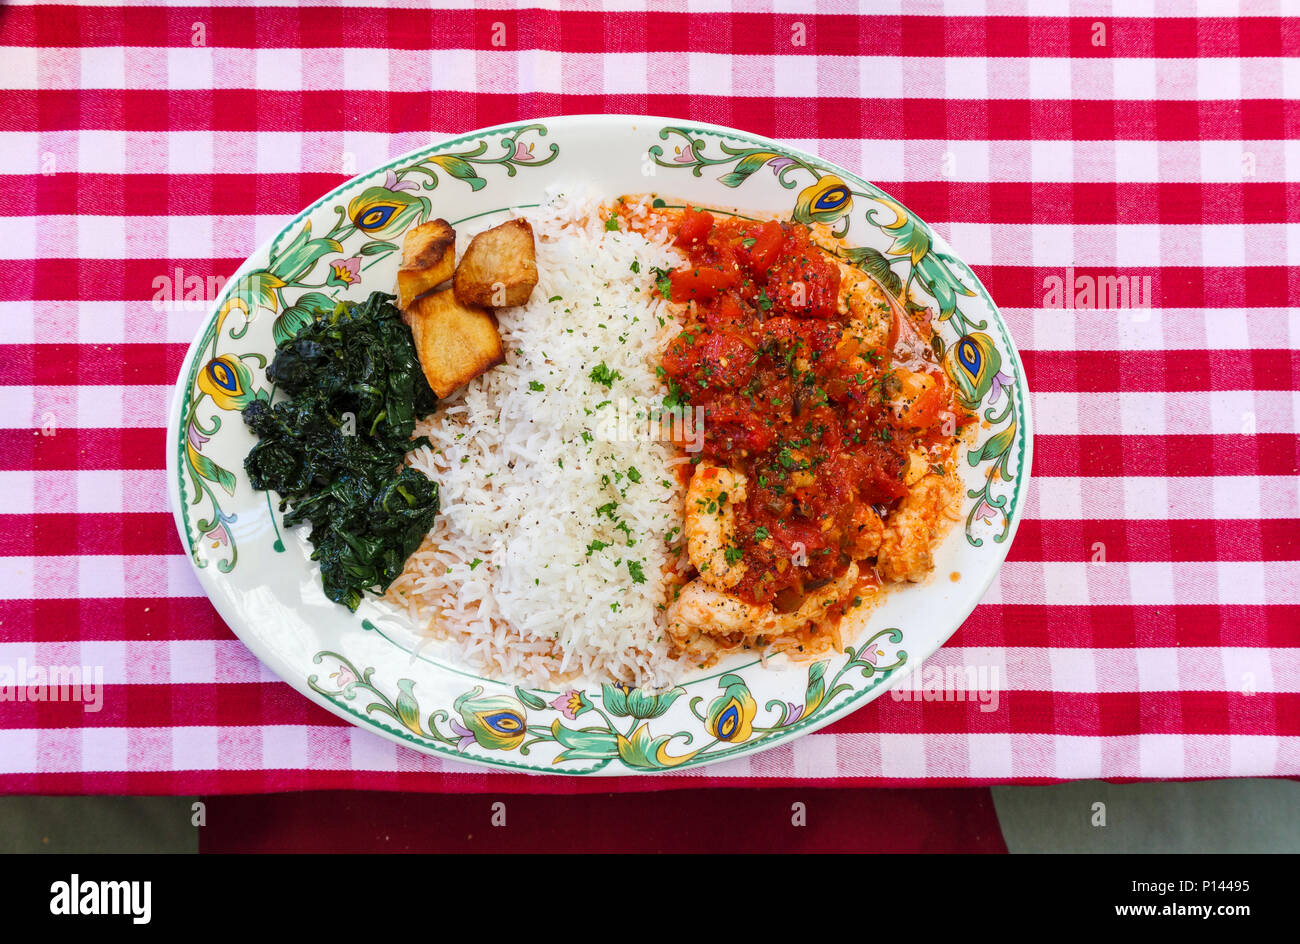 Typical English pub food: a plate of scampi provencale with rice, spinach and fried potatoes, with a red and white gingham checked tablecloth backgrou Stock Photo